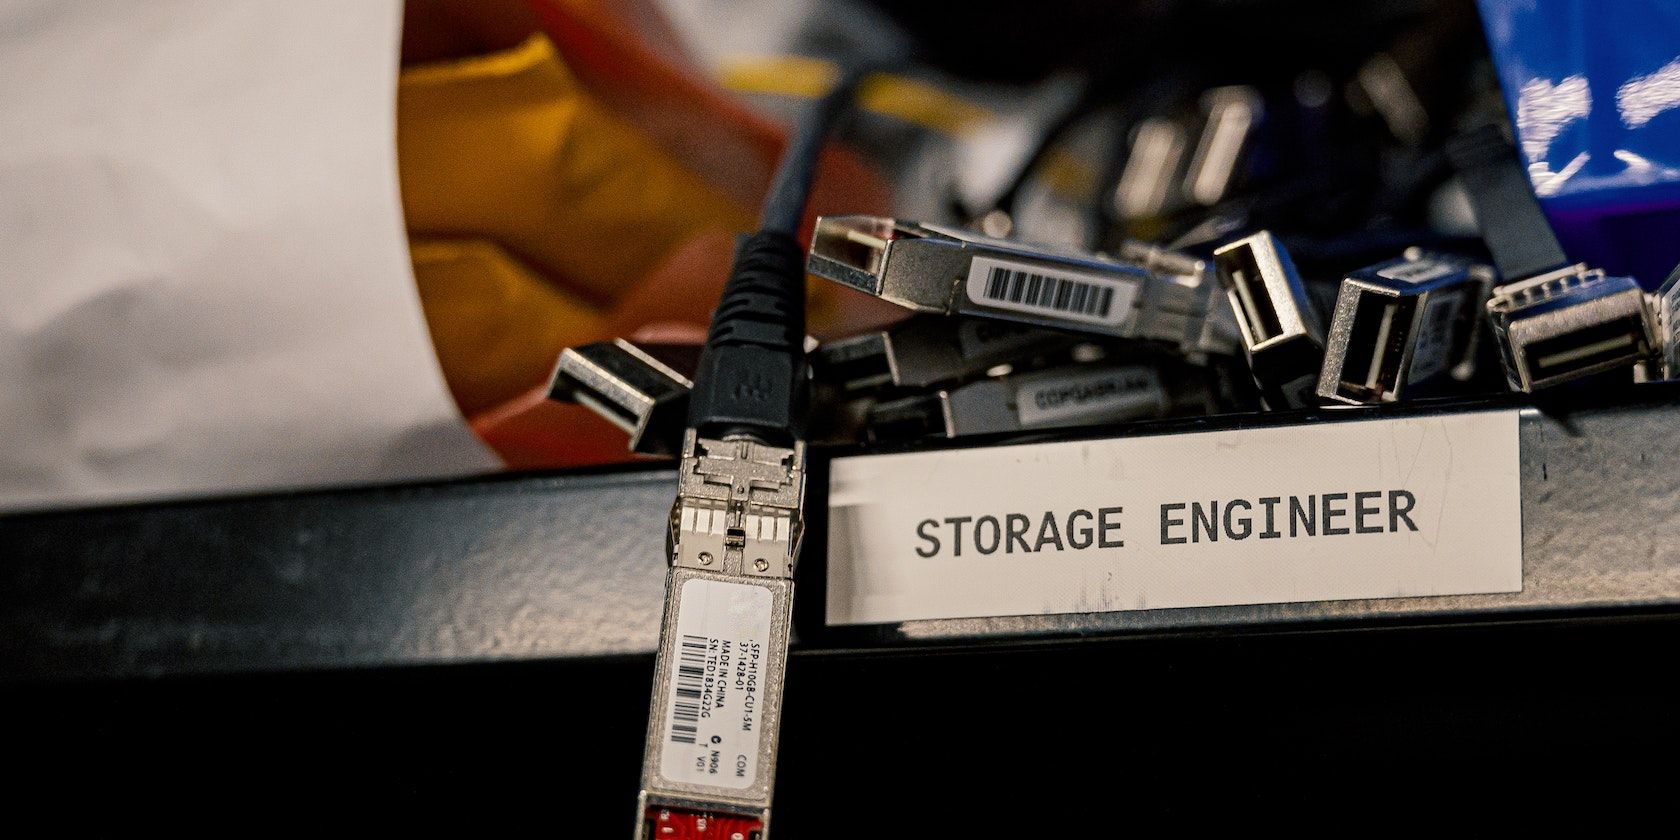 Set of modern cables and connectors next to a label reading “Storage engineer”